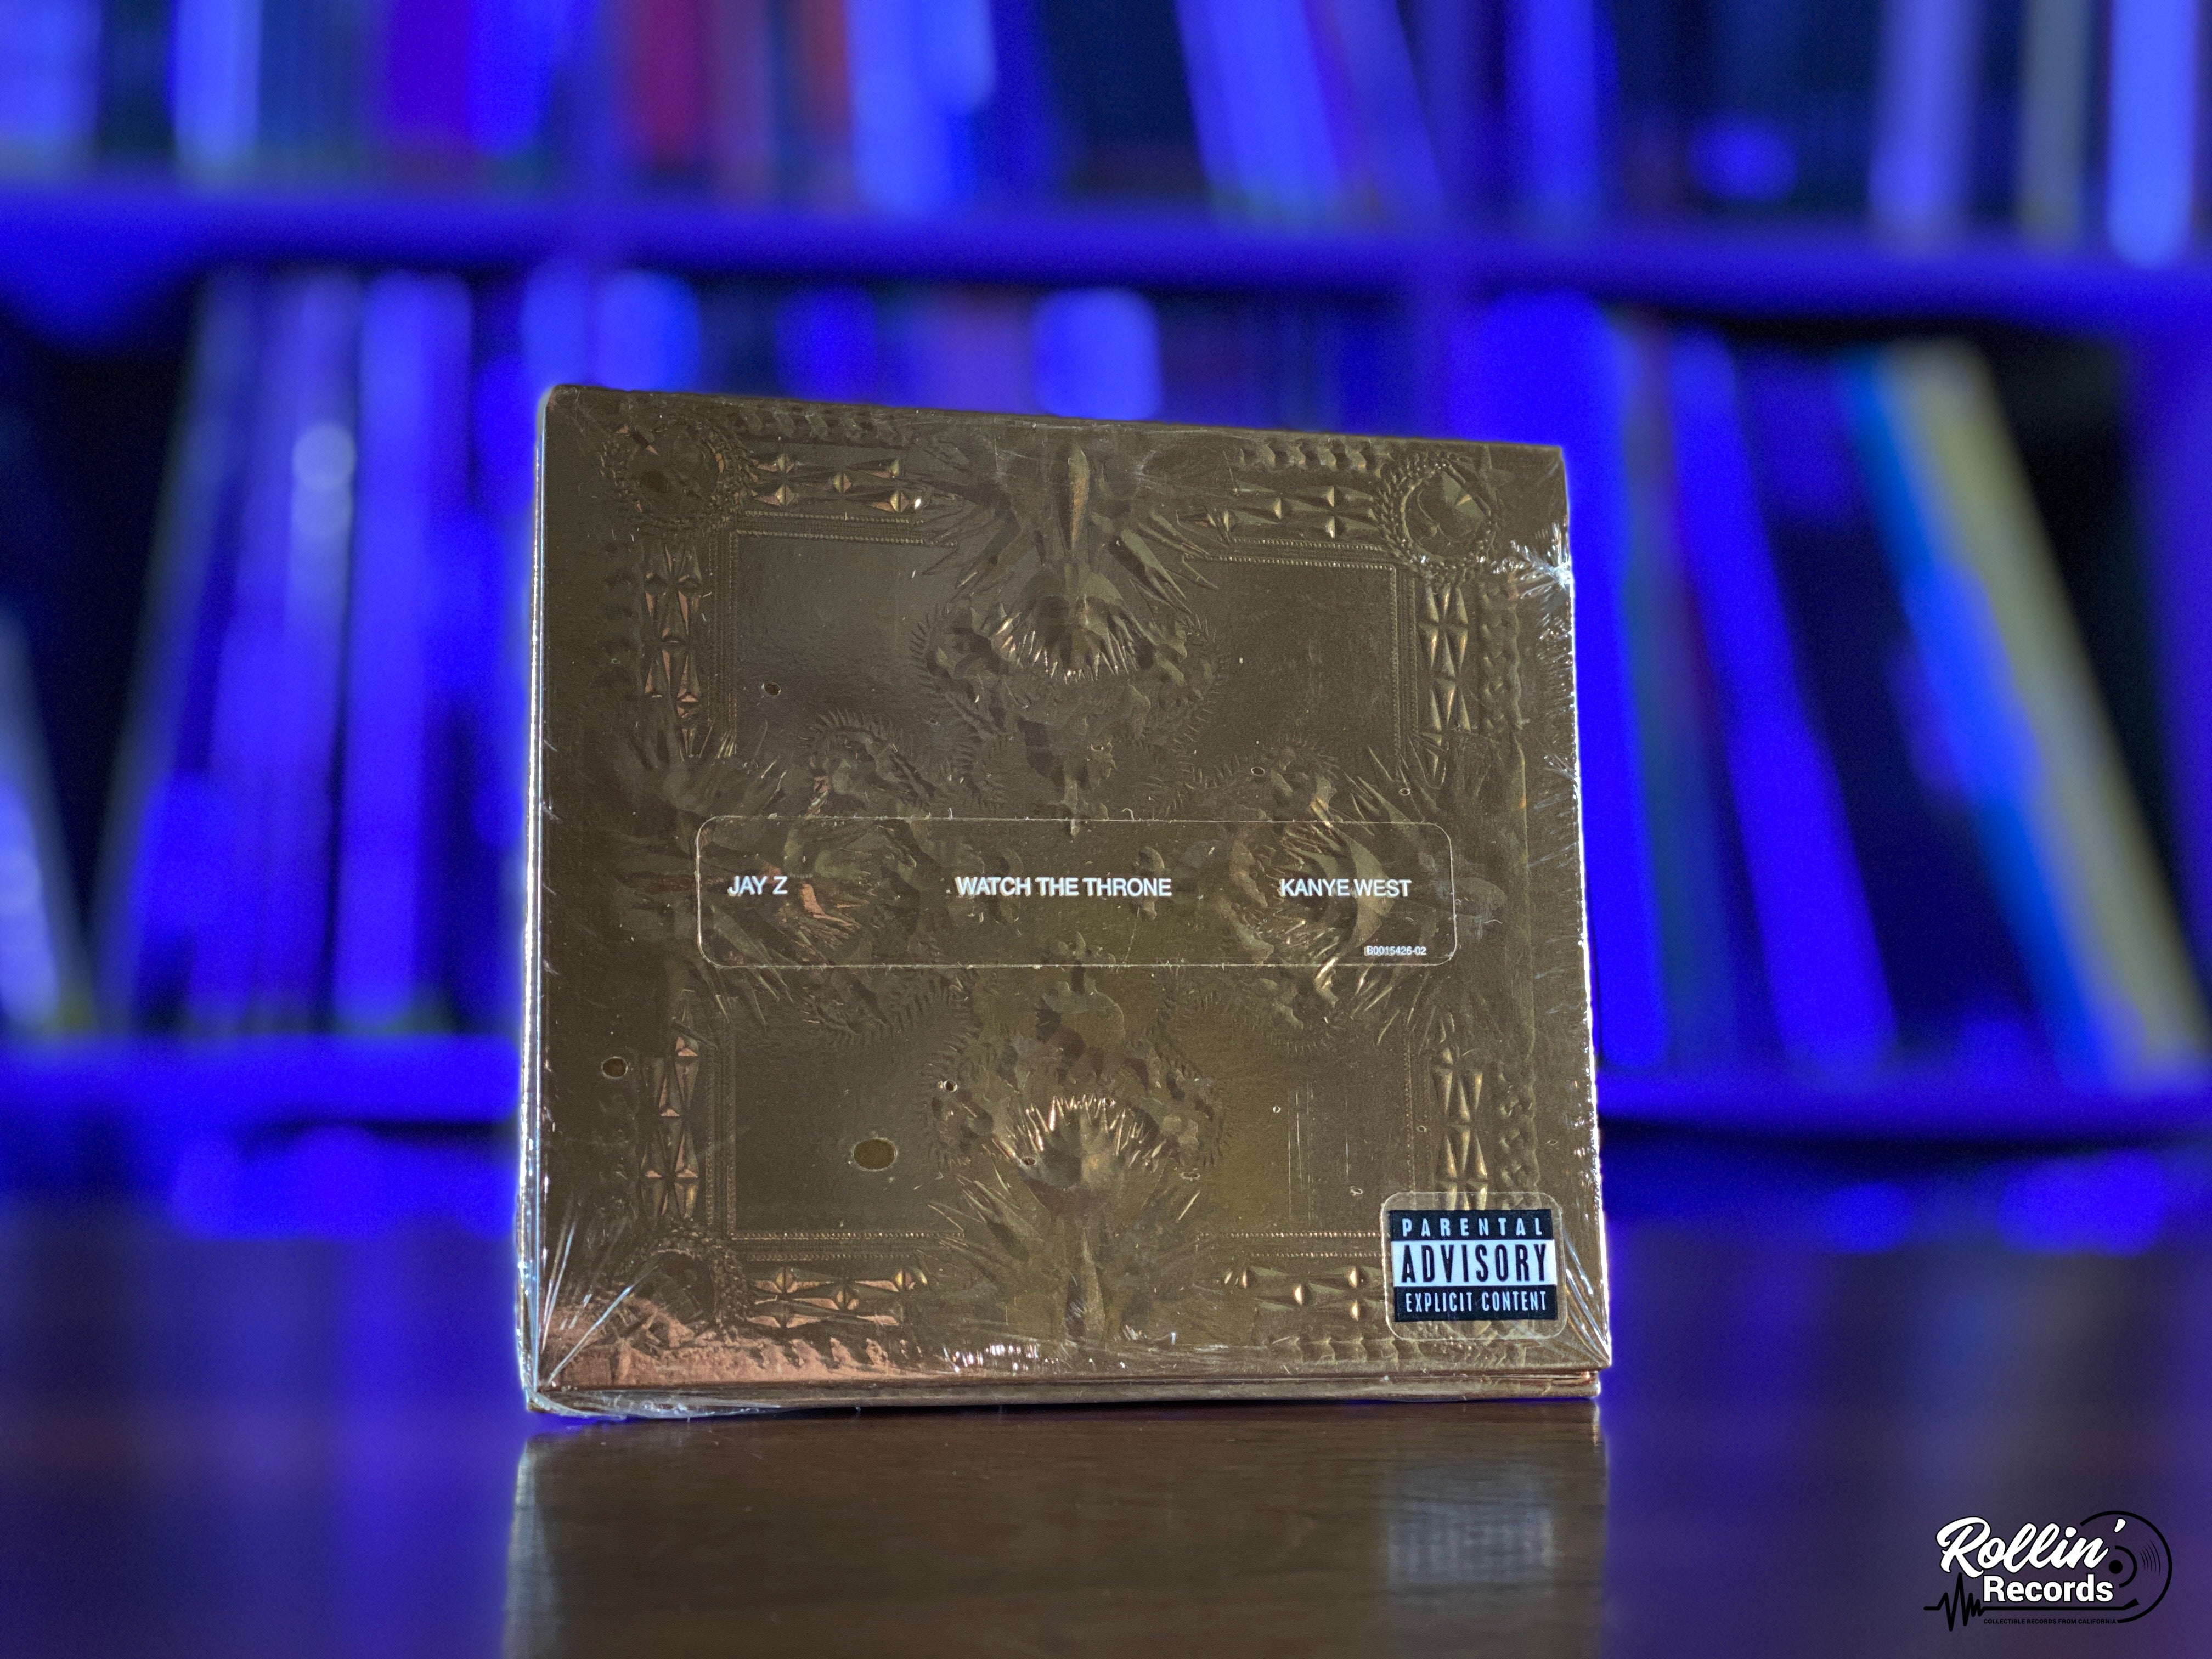 Jay-Z & Kanye West - Watch The Throne (Deluxe CD) – Rollin' Records